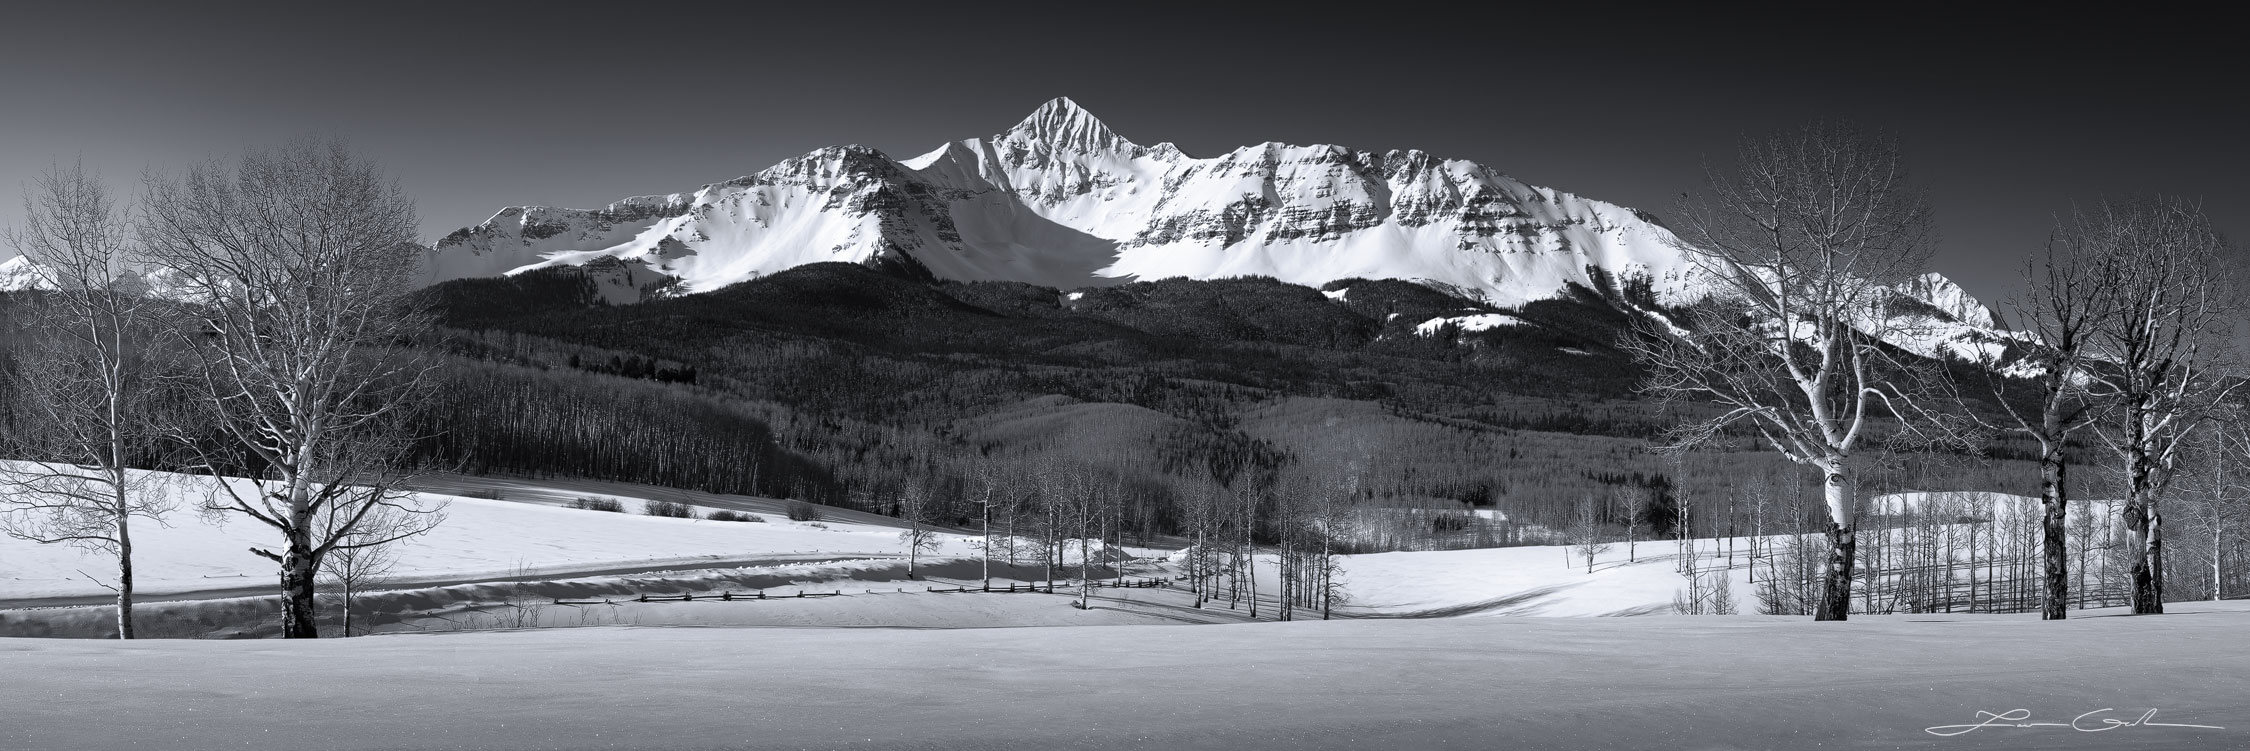 Black and white winter scene of a snowfield, aspen trees and Wilson Peak in the background